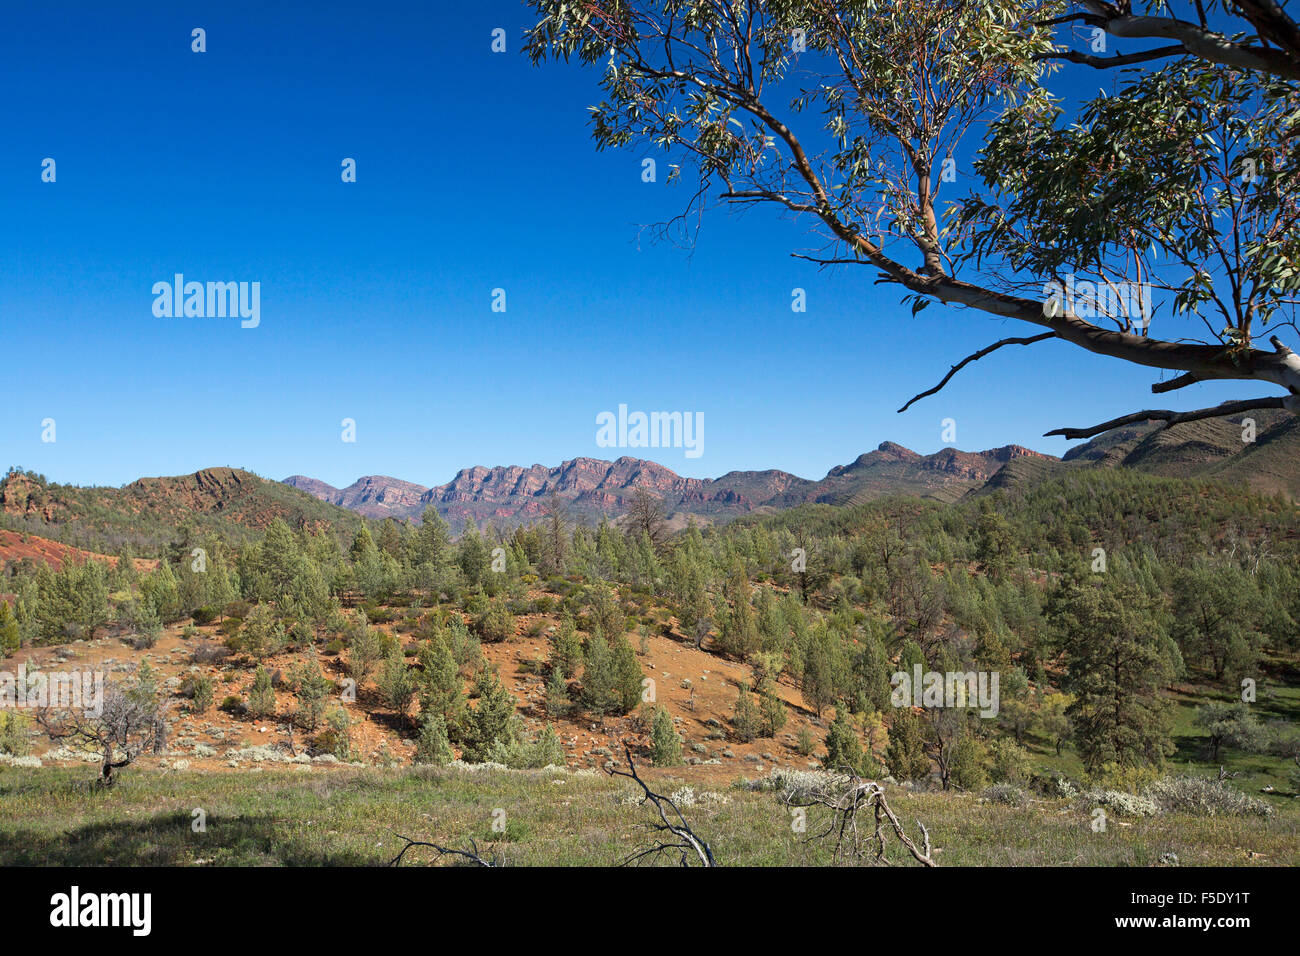 Spectacular outback landscape, peaks of Flinders Ranges rising beyond red hills cloaked with cypress pine trees under blue sky in South Australia Stock Photo